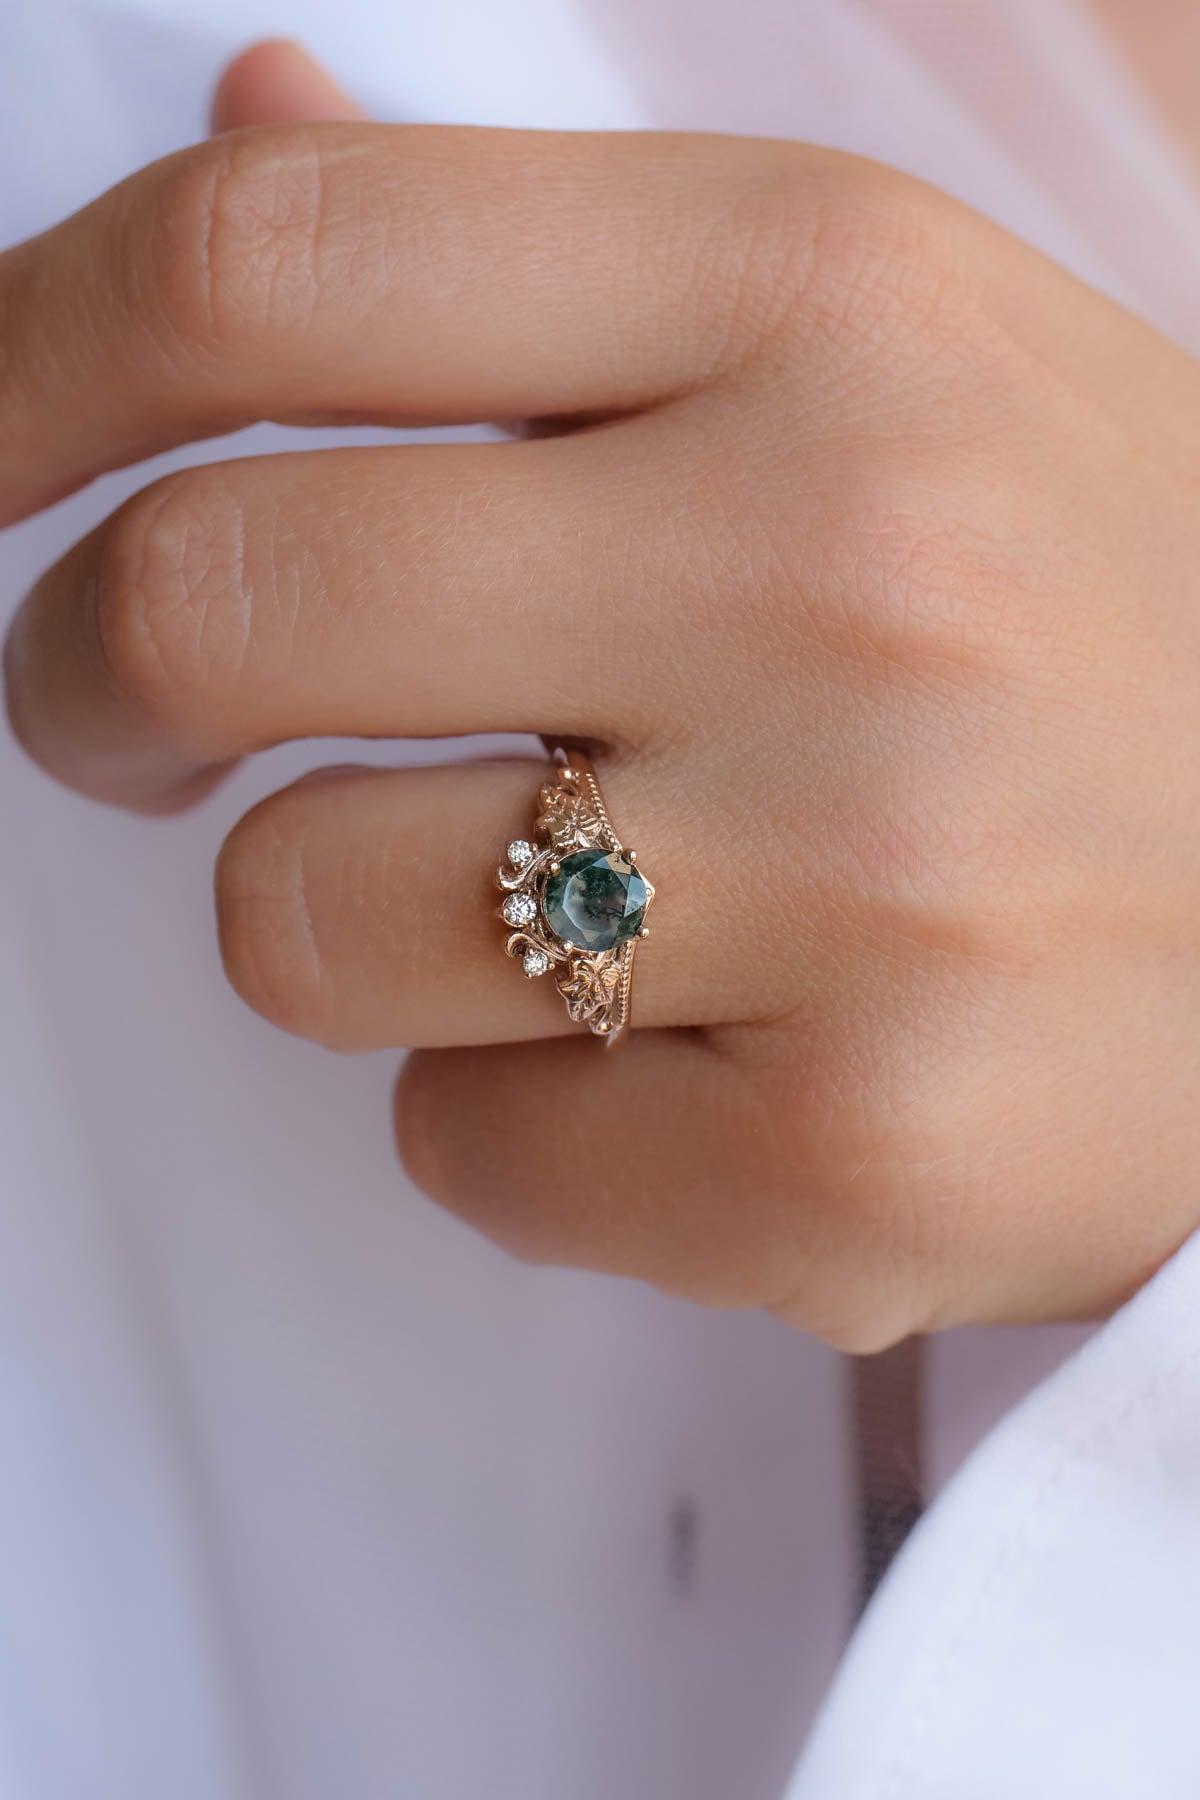 Green moss agate engagement ring, promise ring with diamonds / Ariadne